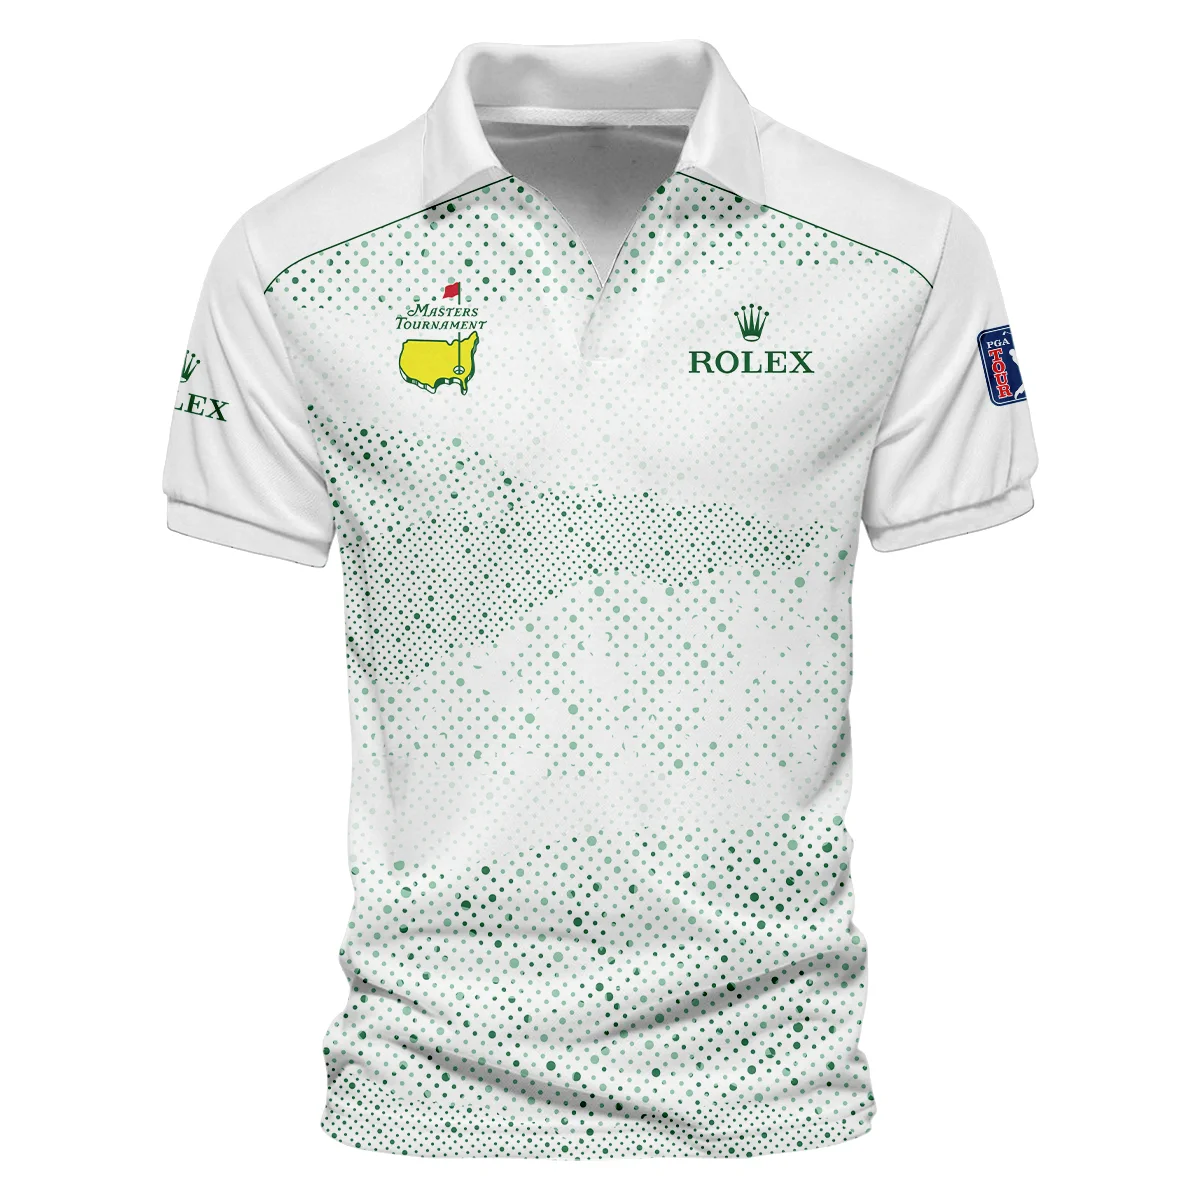 Golf Stye Classic White Mix Green Masters Tournament Rolex Vneck Polo Shirt Style Classic Polo Shirt For Men